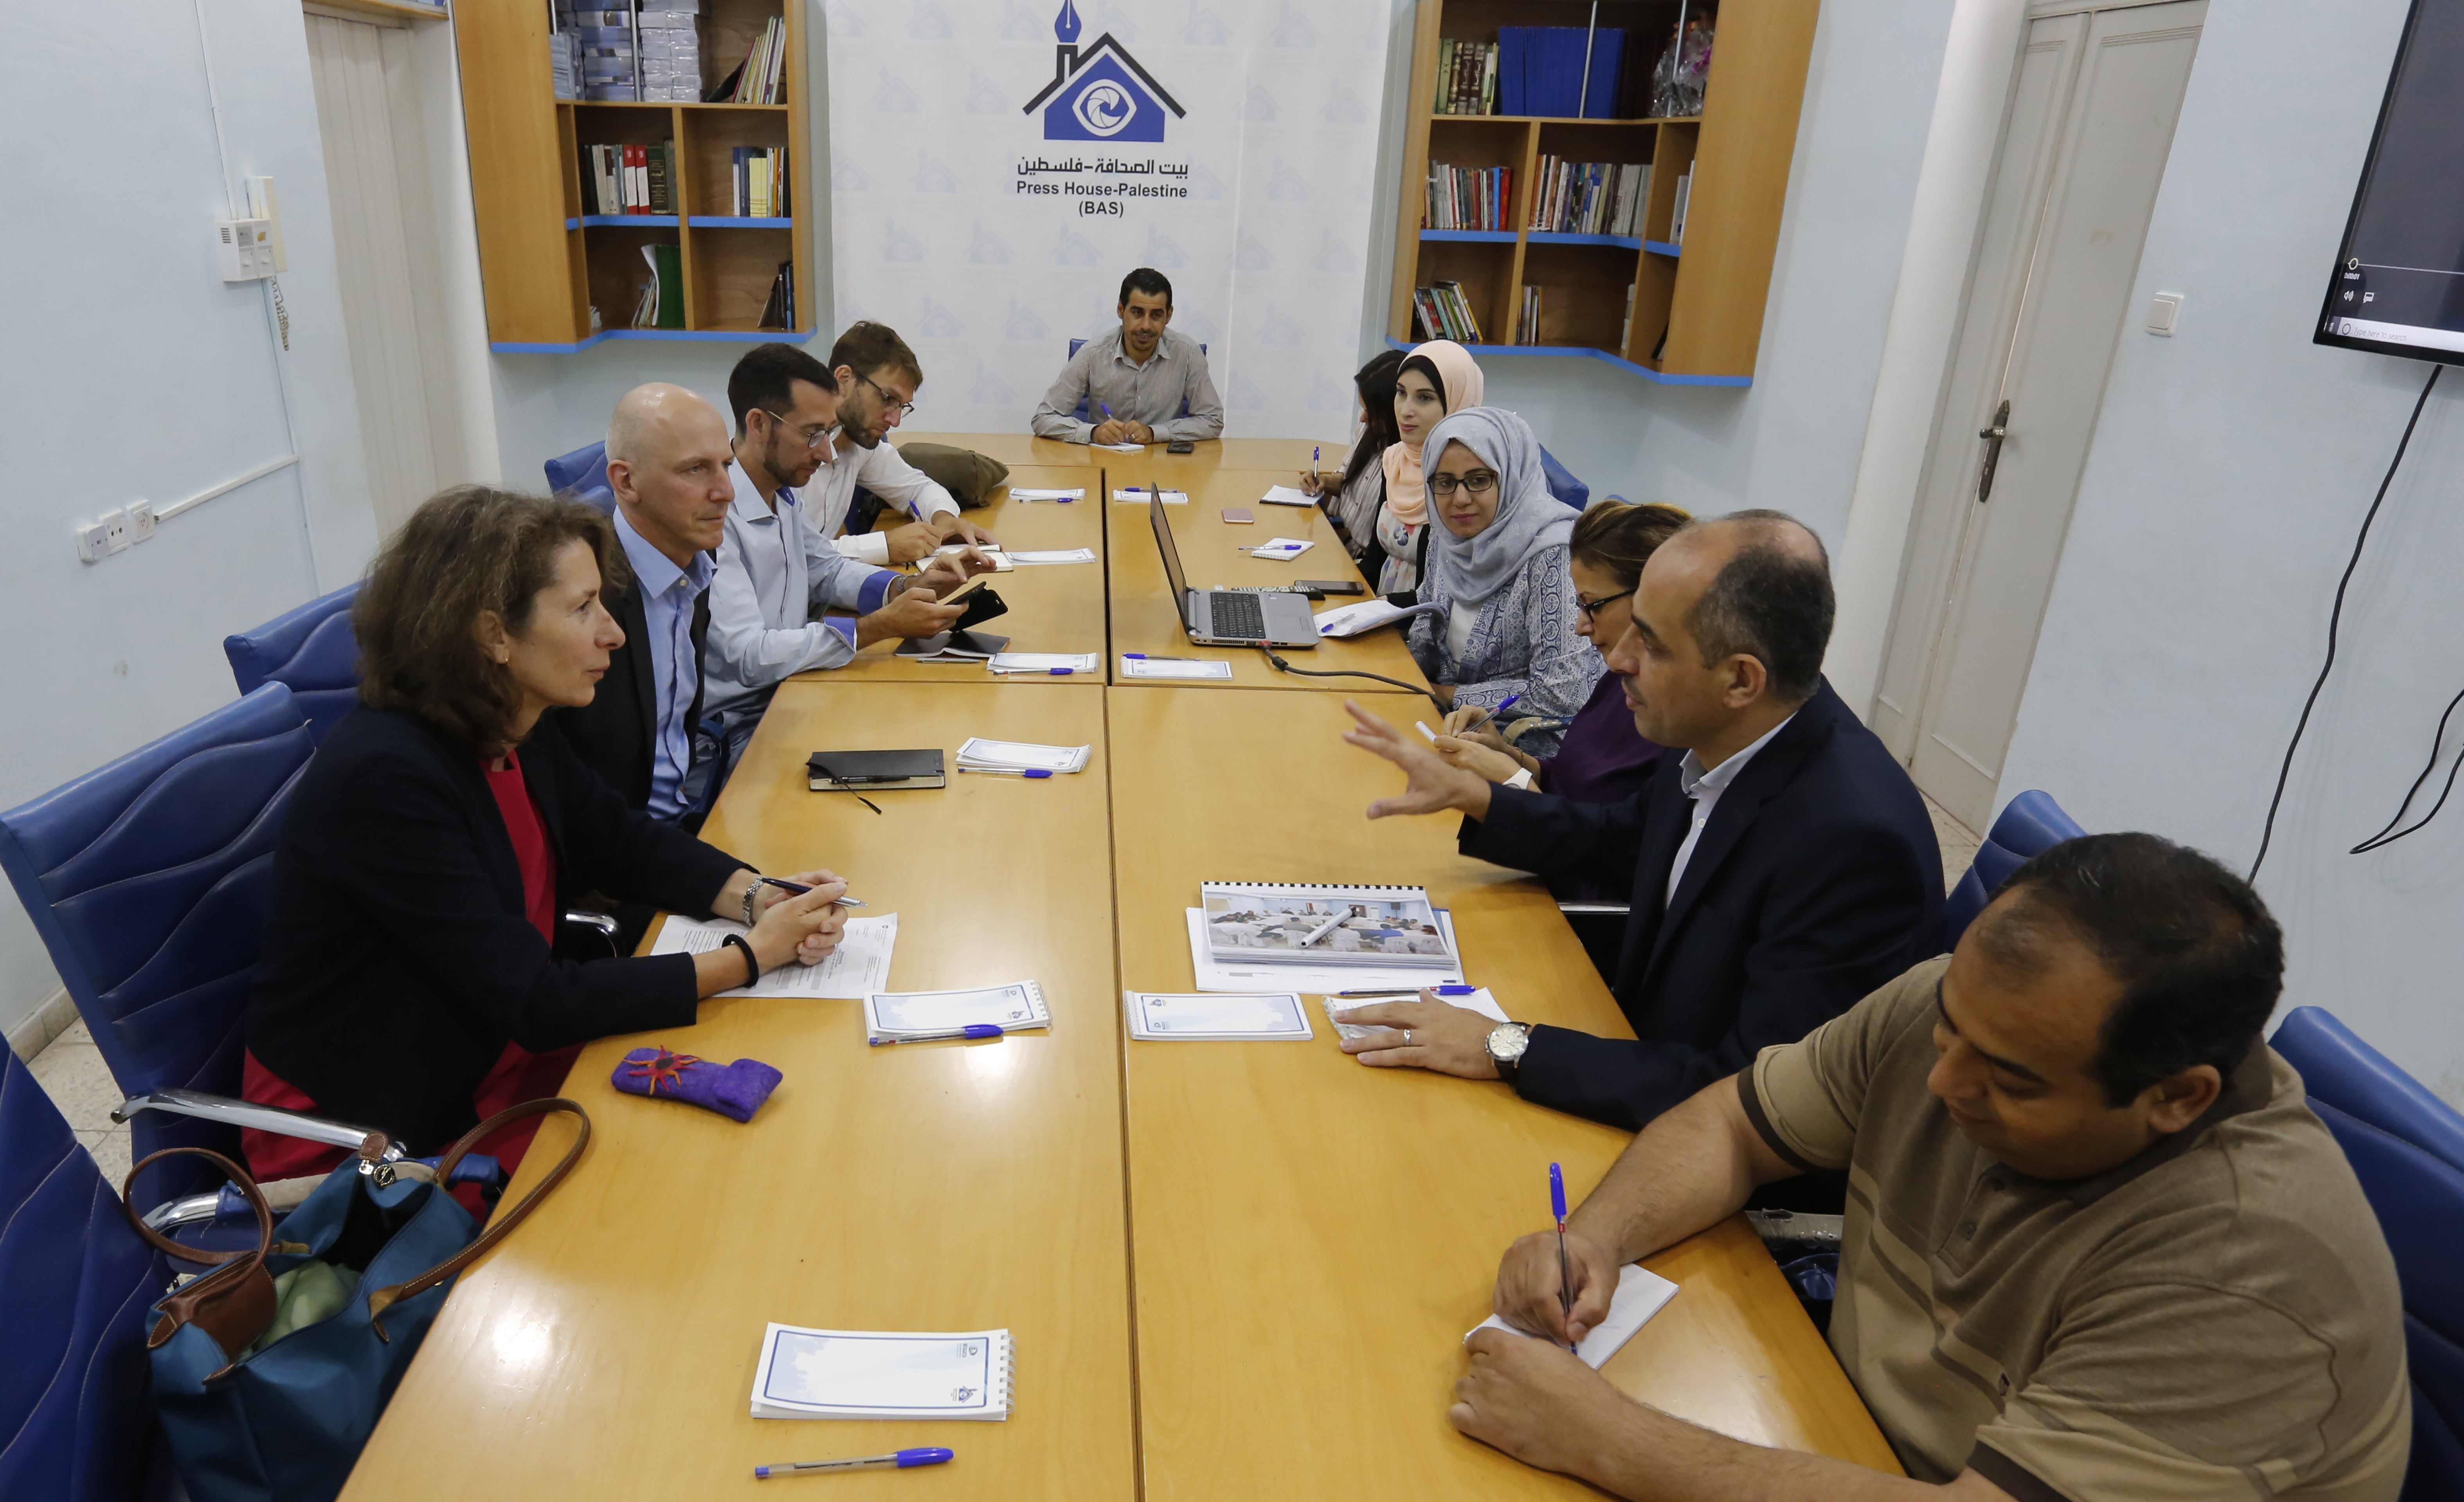 The Deputy Minister of the Foreign Affairs of Switzerland Visits the Press House